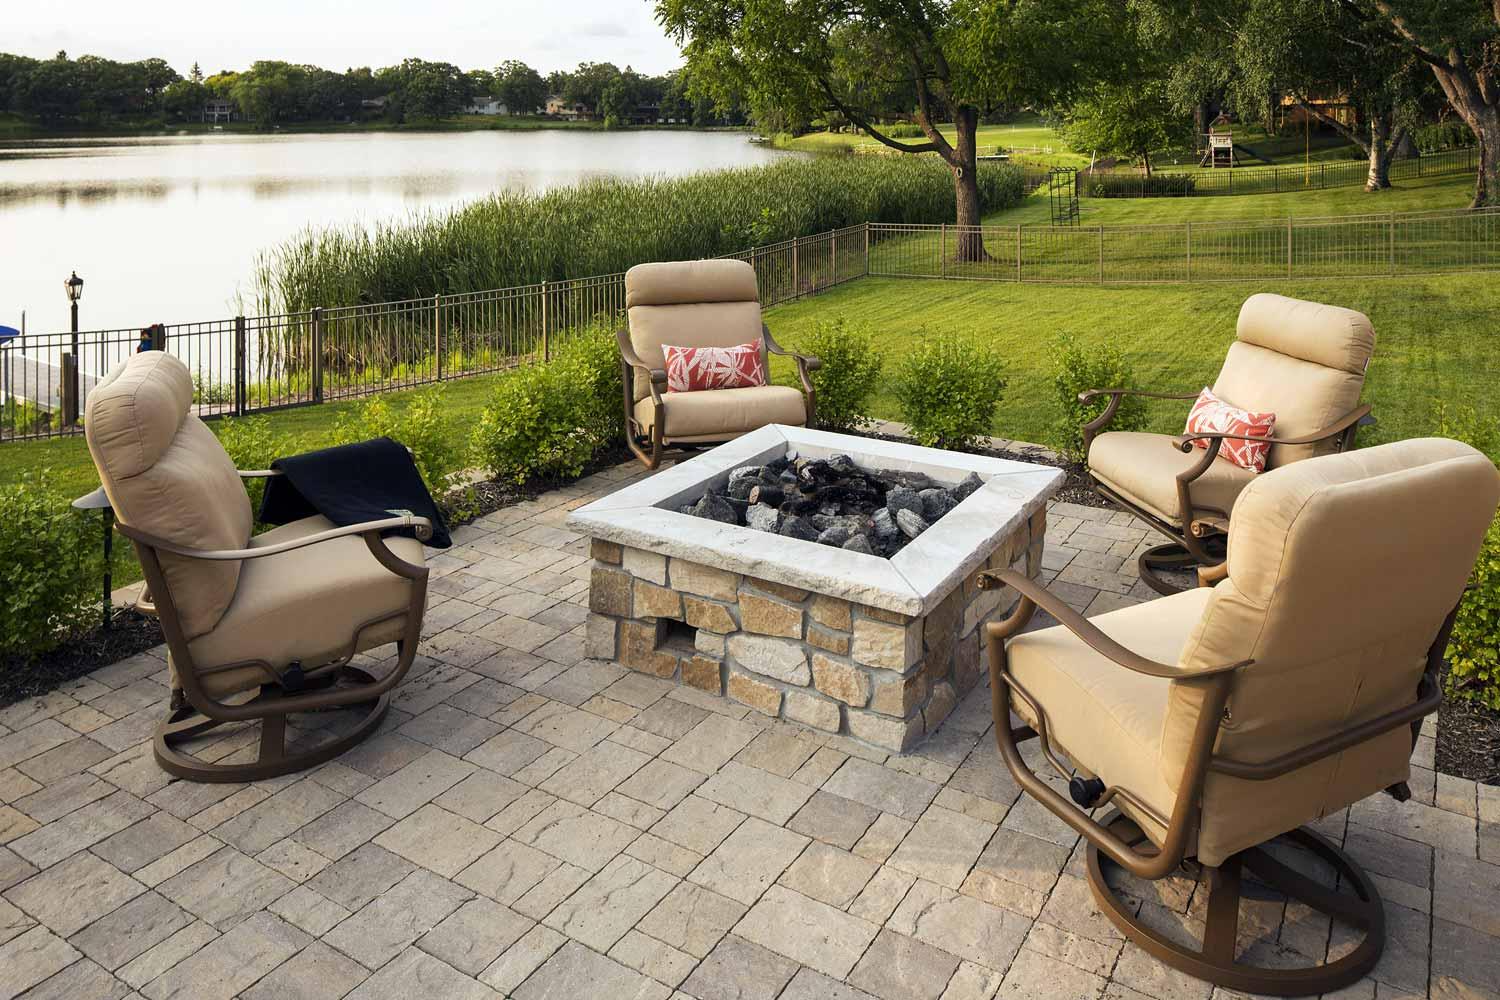 Seating around the built-in firepit